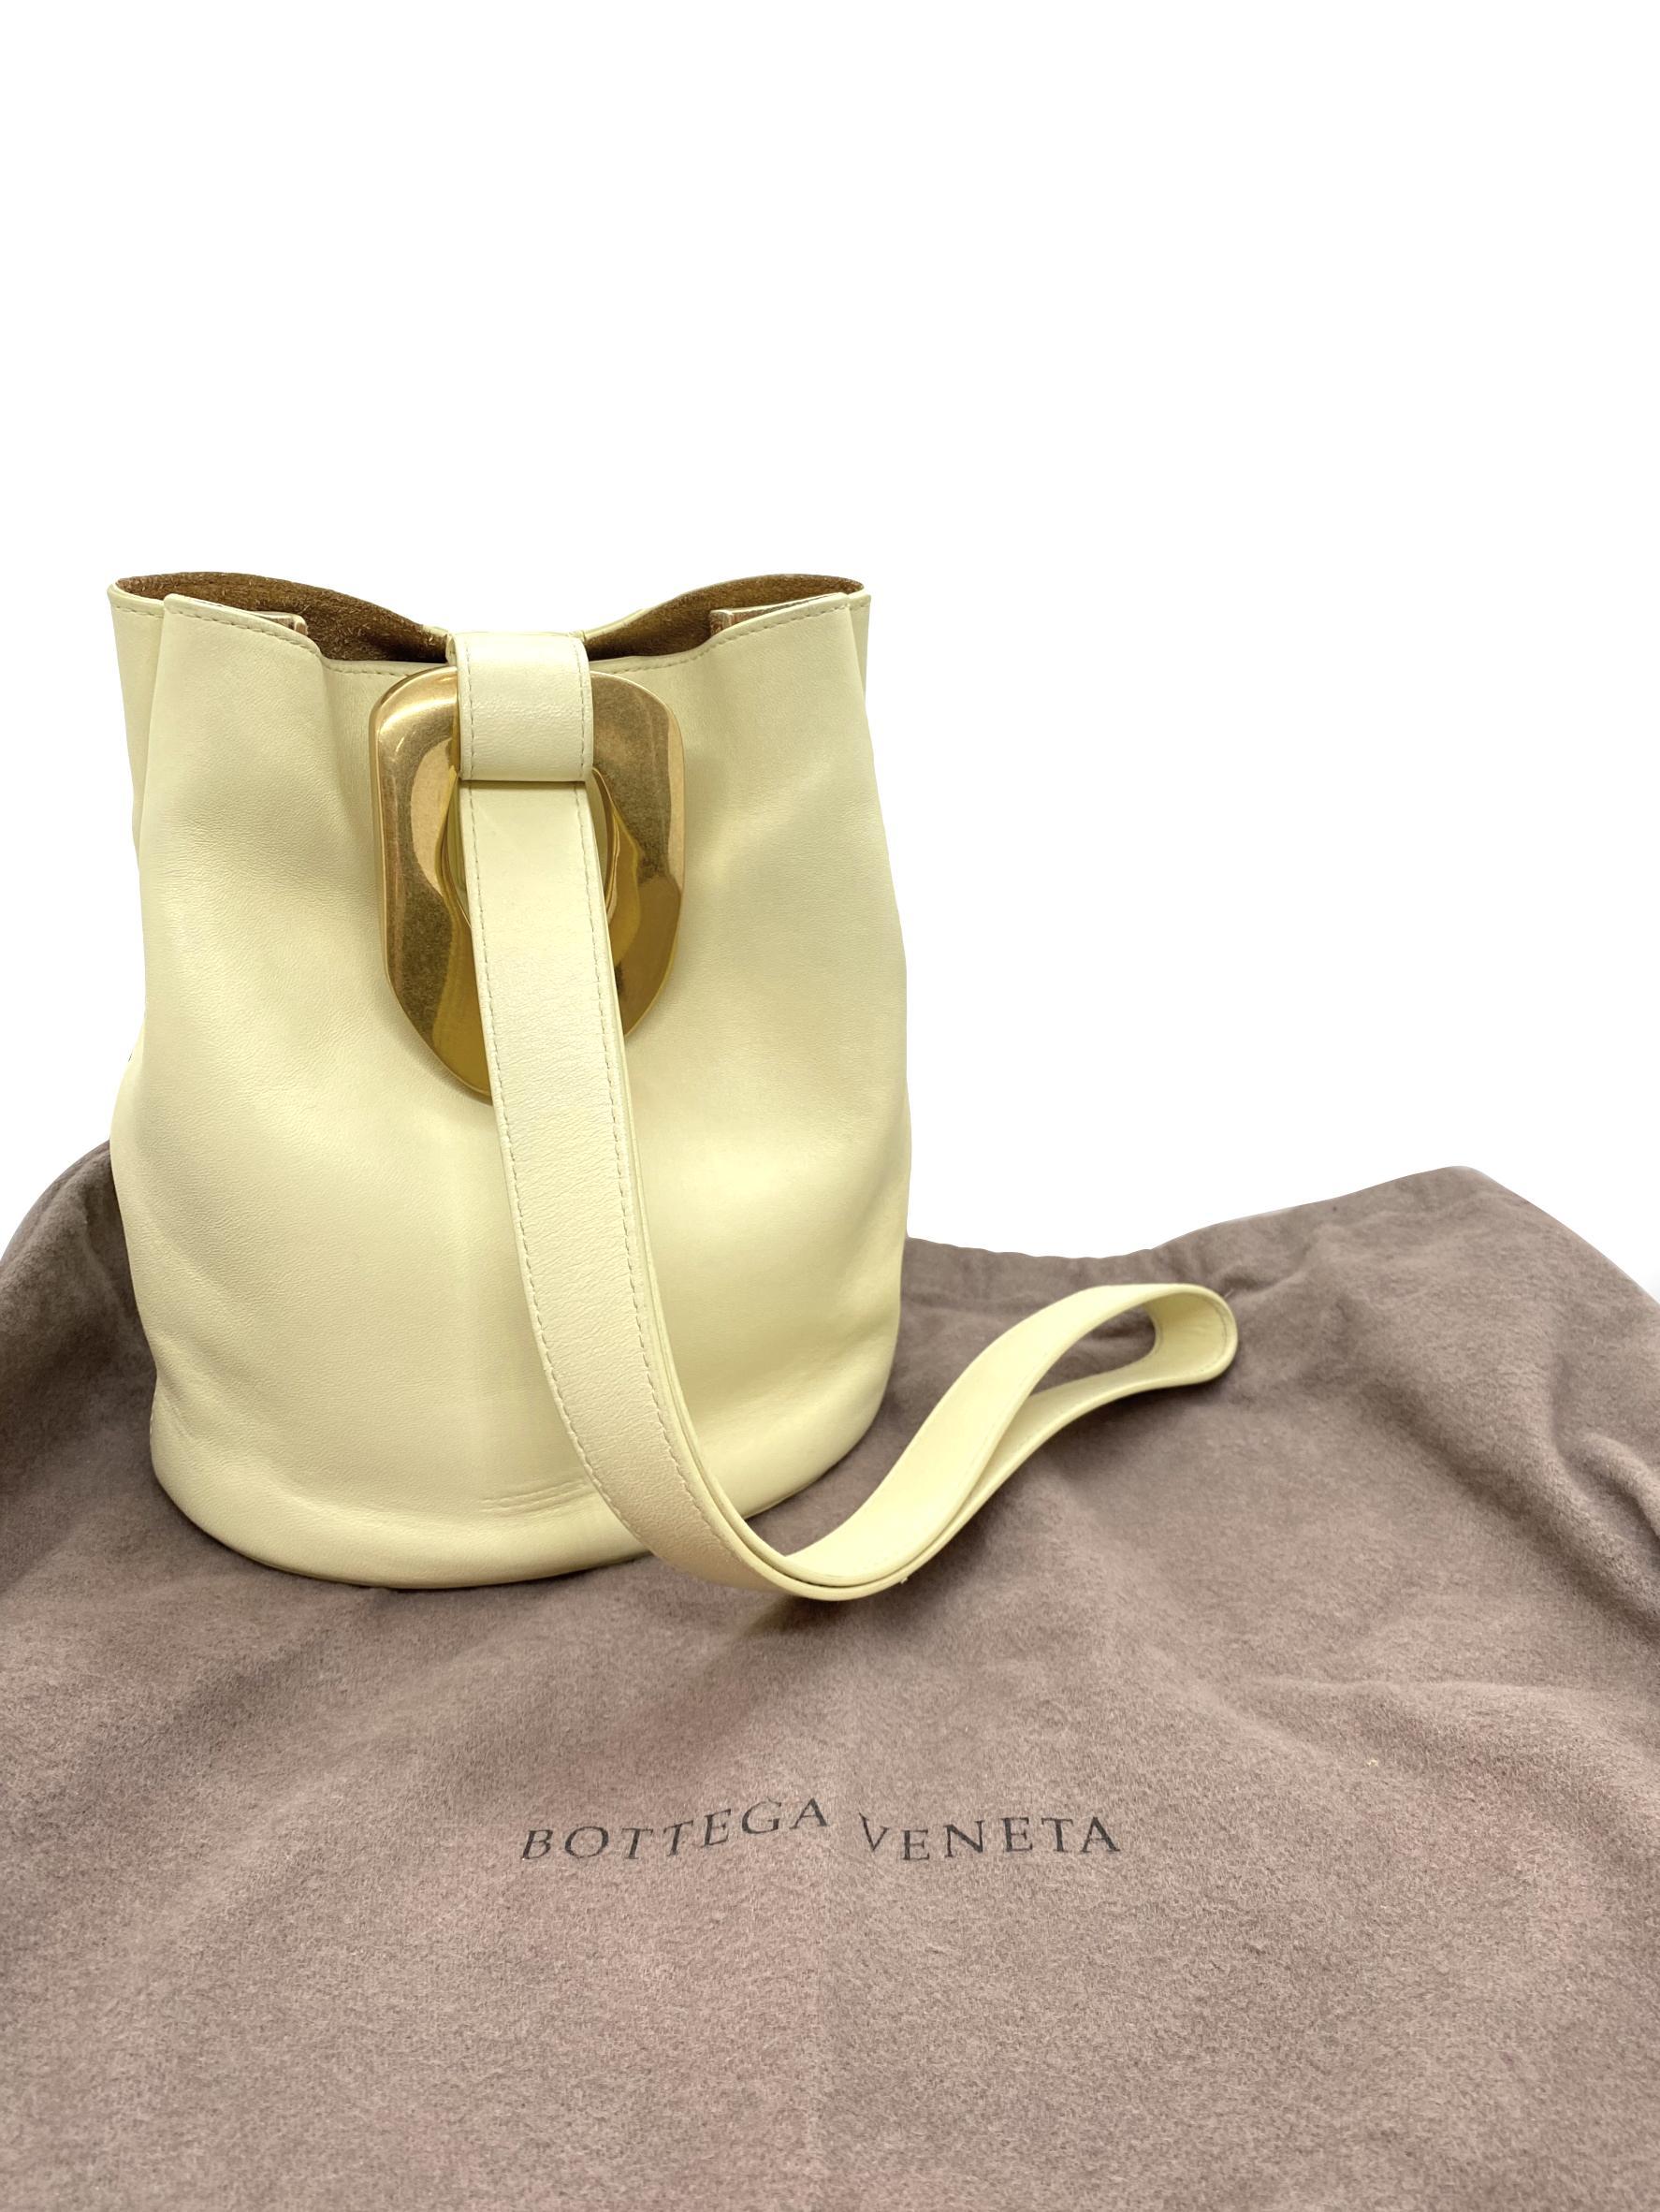 Bottega Veneta Petite Lambskin Ice Cream Drop Bucket Bag, circa 2019. This contemporary piece of fashion that was introduced for the Fall 2019 line from iconic fashion house Bottega Veneta is currently sold out and unavailable in the United States